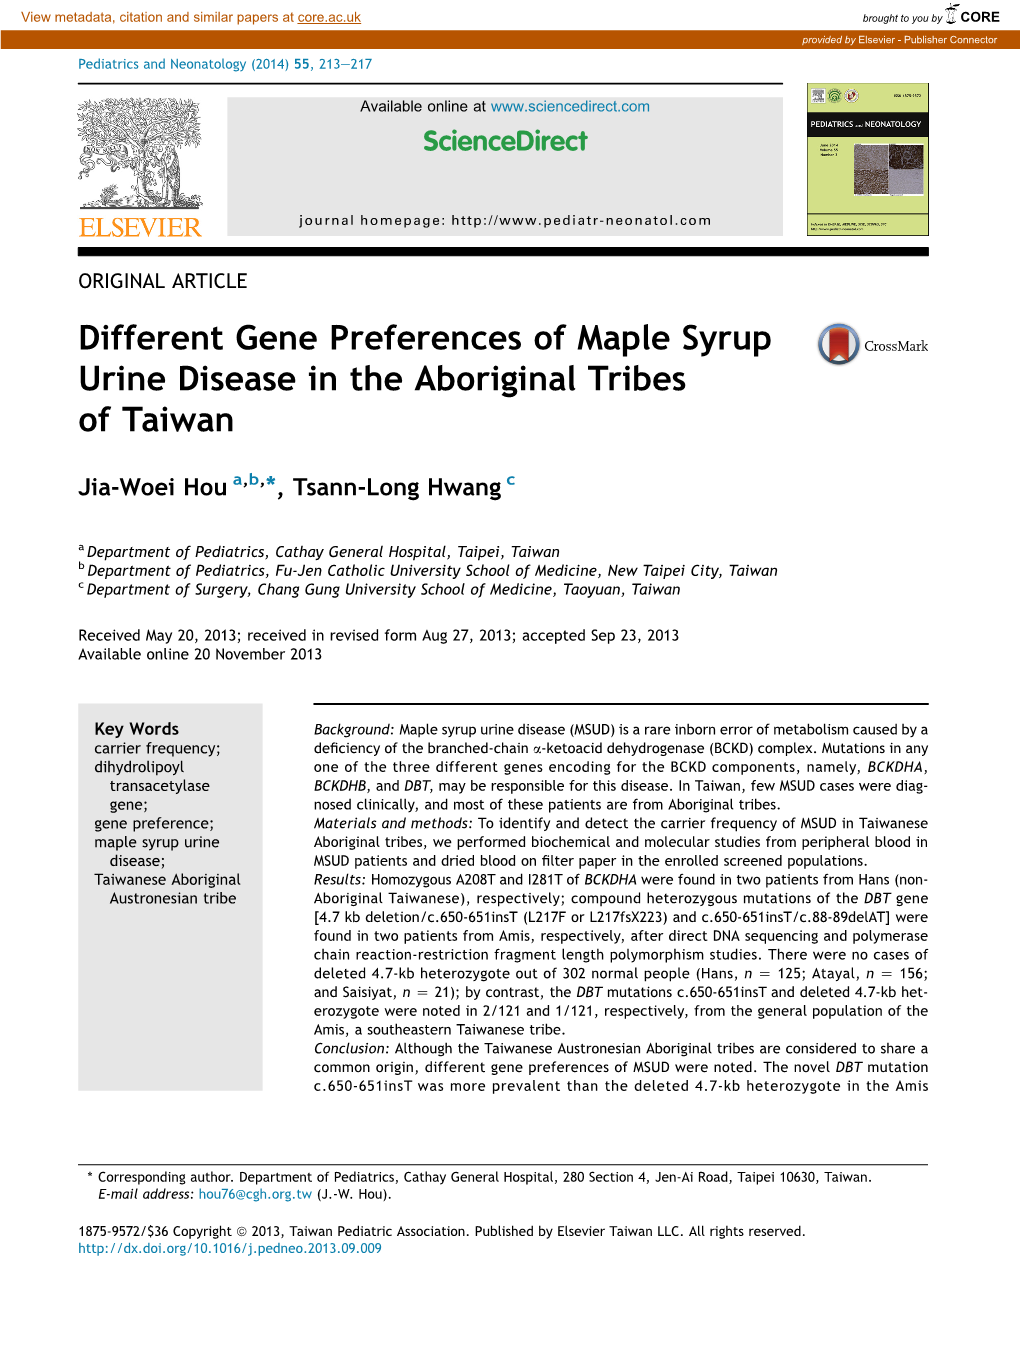 Different Gene Preferences of Maple Syrup Urine Disease in the Aboriginal Tribes of Taiwan